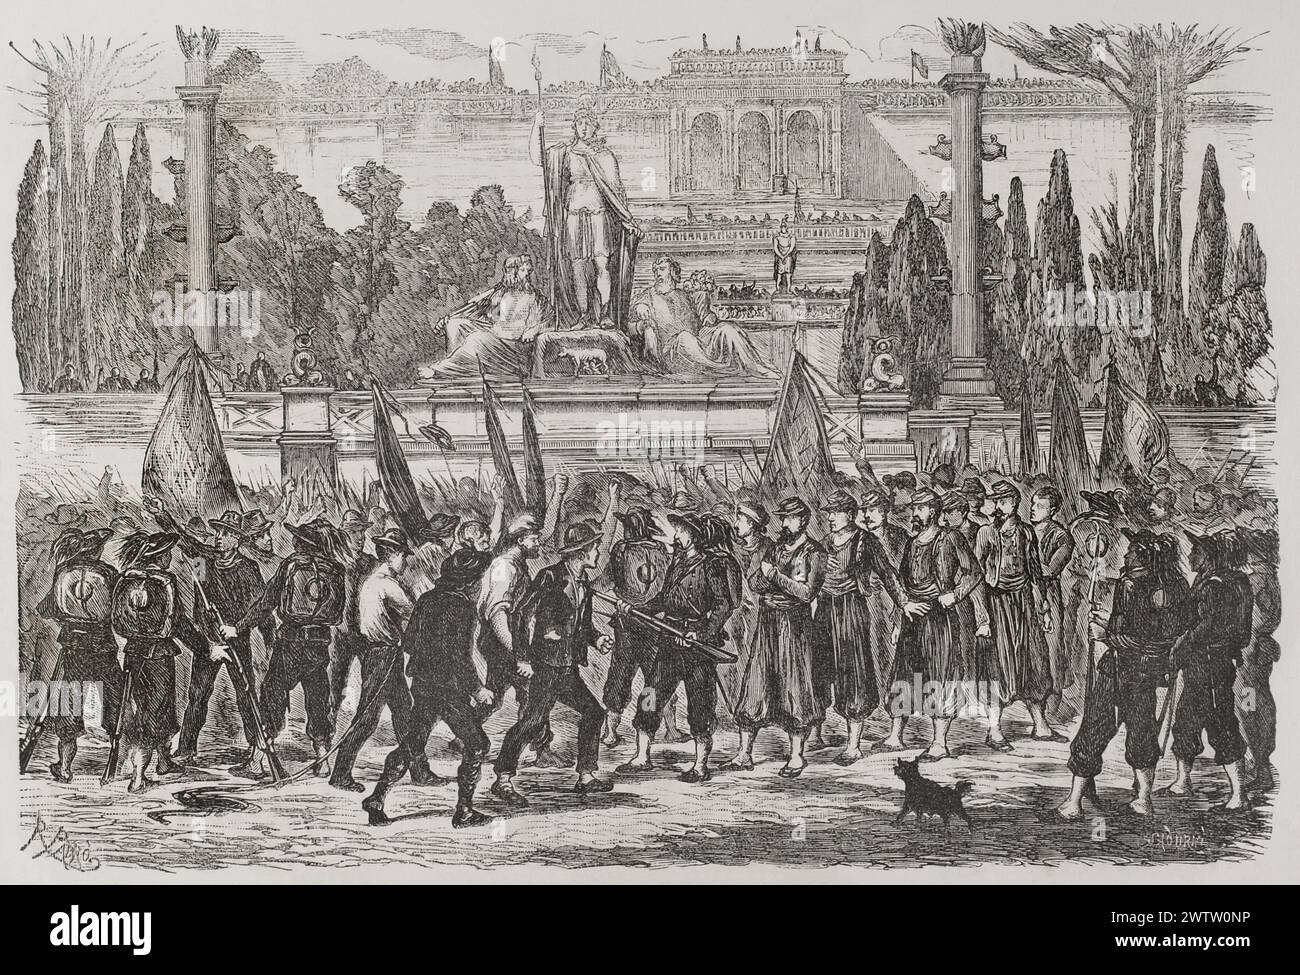 Unification of Italy. Capture of Rome. Occupation of Rome by troops of the Kingdom of Italy led by General Raffaele Cadorna on 20 September 1870. Italian troops taking possession of the Piazza del Popolo, preventing the common people attacking the Papal Zouaves taken prissoners. Drawing by R. Padró. Engraving by Sadurní. 'Historia de la Guerra de Francia y Prusia' (History of the War between France and Prussia). Volume II. Published in Barcelona, 1871. Author: Celestino Sadurní (c. 1830-1896). Spanish engraver. Ramón Padró y Pedret (1848-1915). Spanish painter. Stock Photo